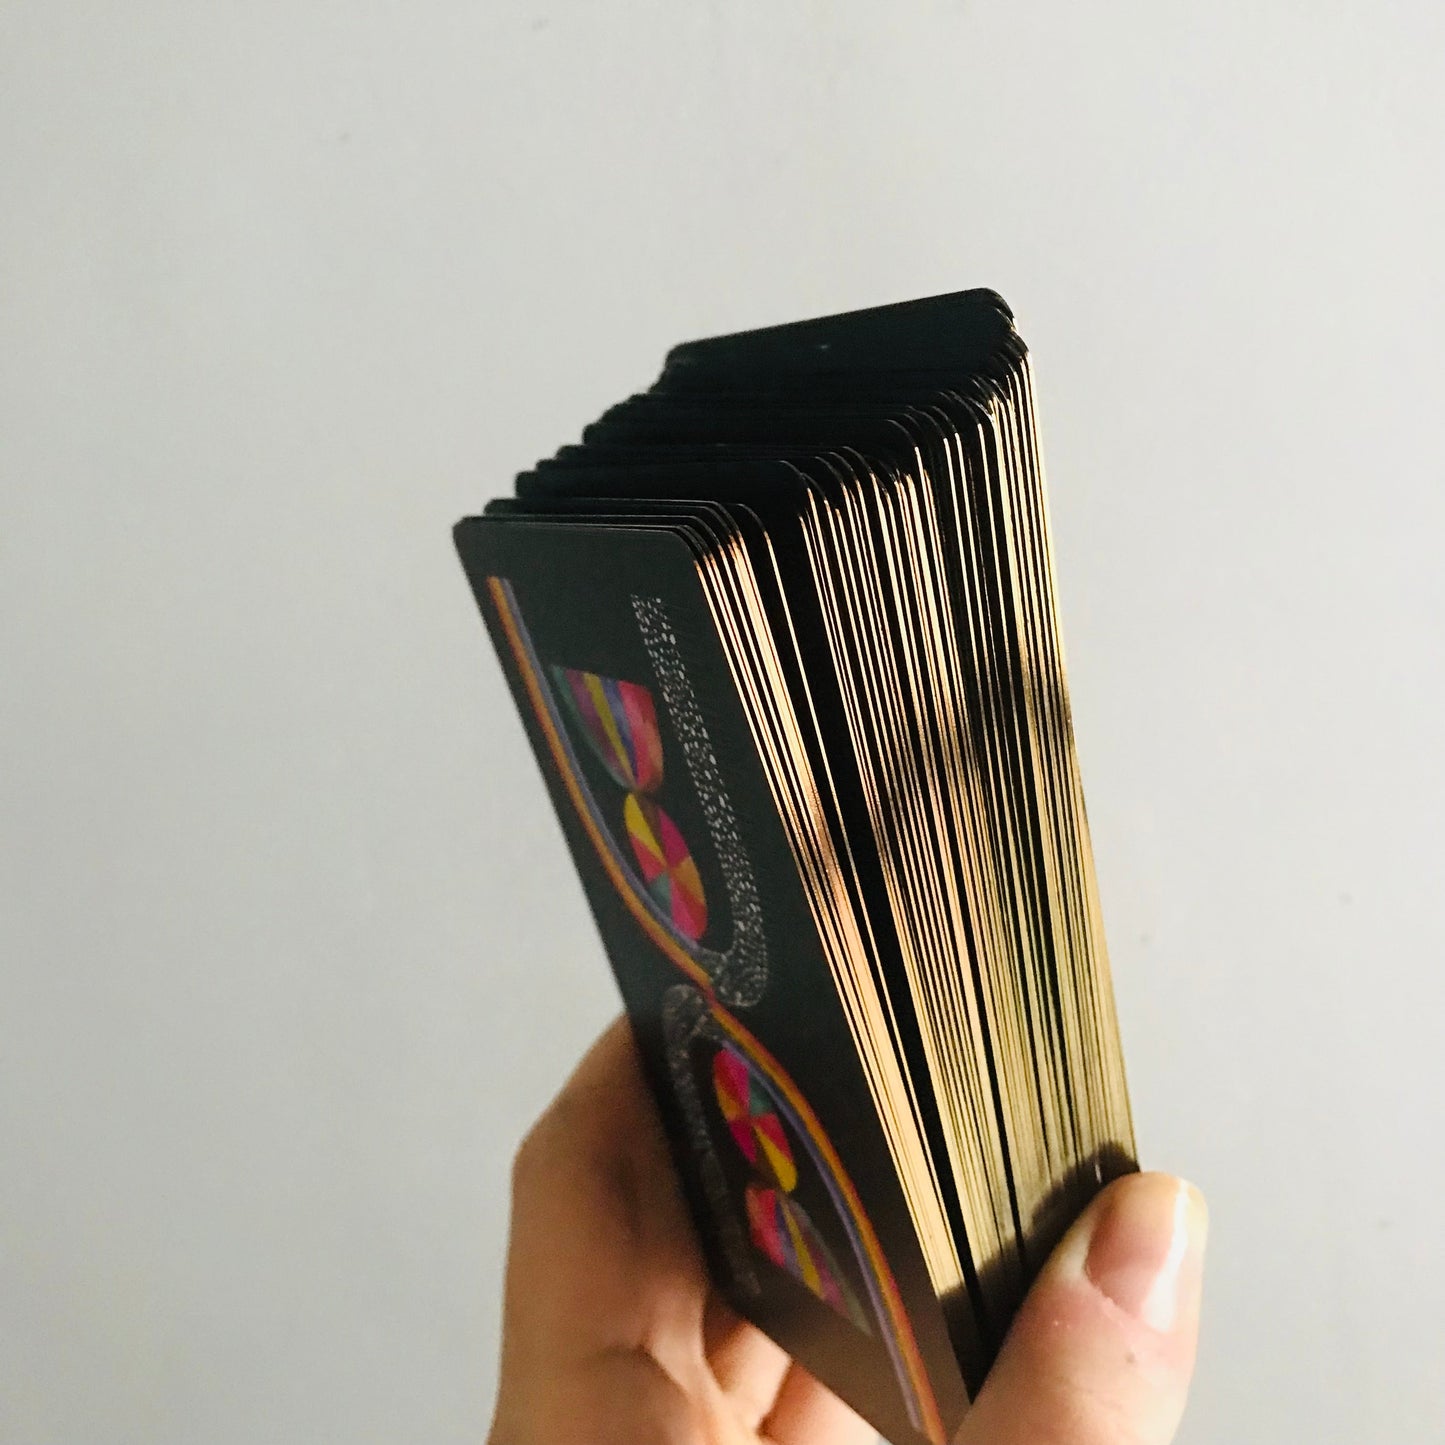 Plant Oracle Deck + Guide Book